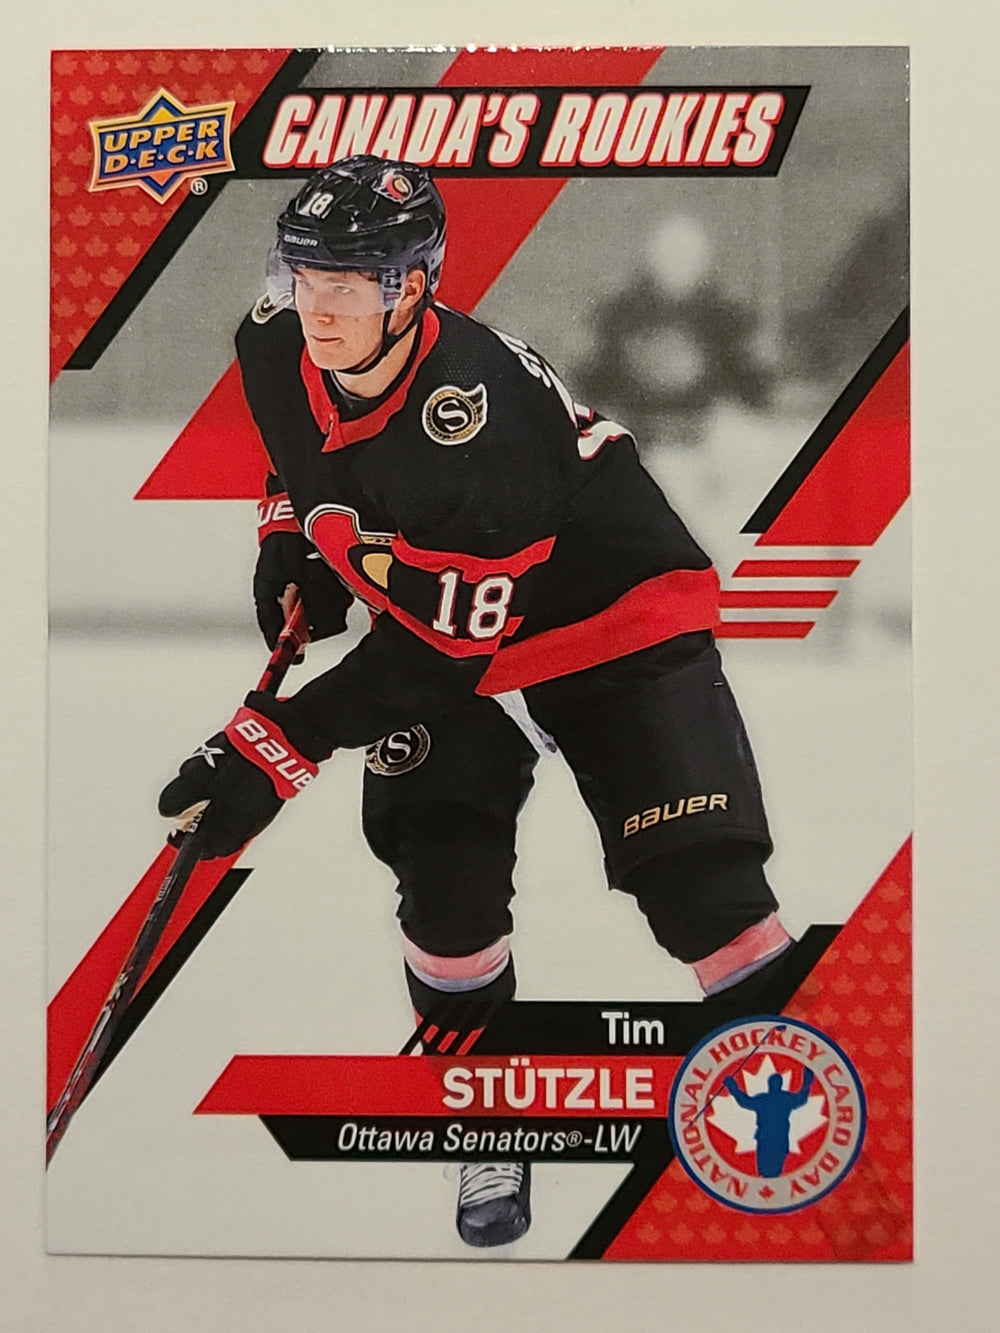 2020-21 National Hockey Card Day Canada Full Set and Singles (List)